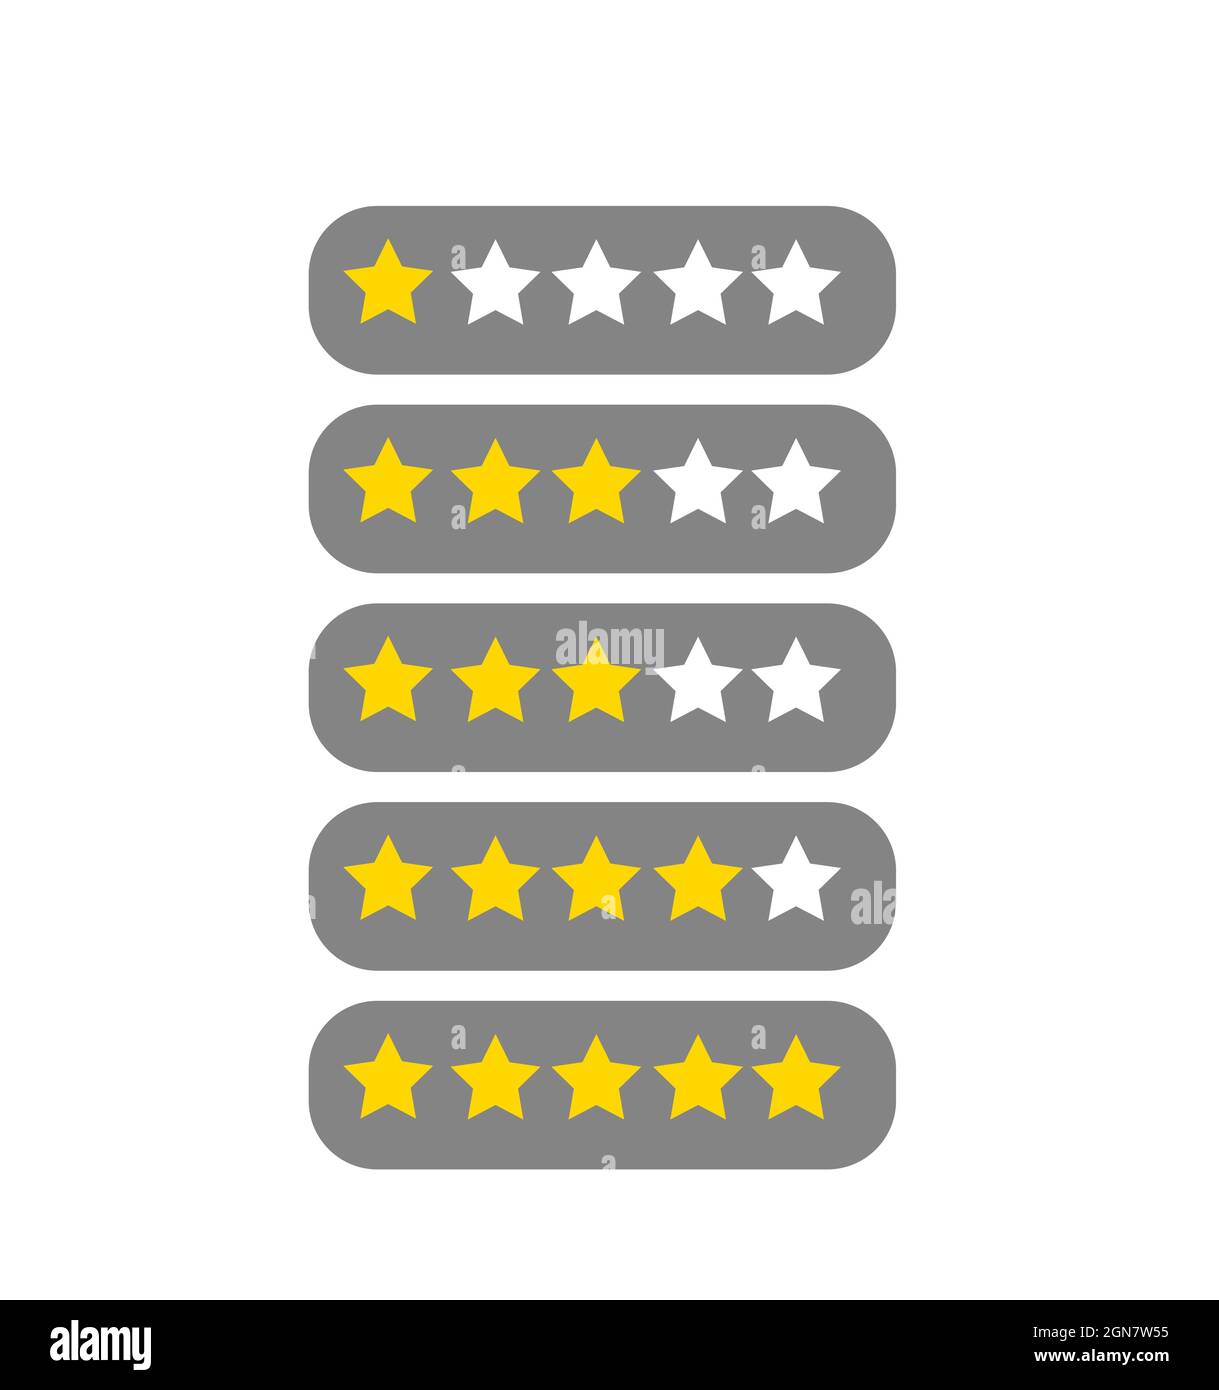 5 star rating icon vector illustration, Ranking stars isolated on white background Stock Vector